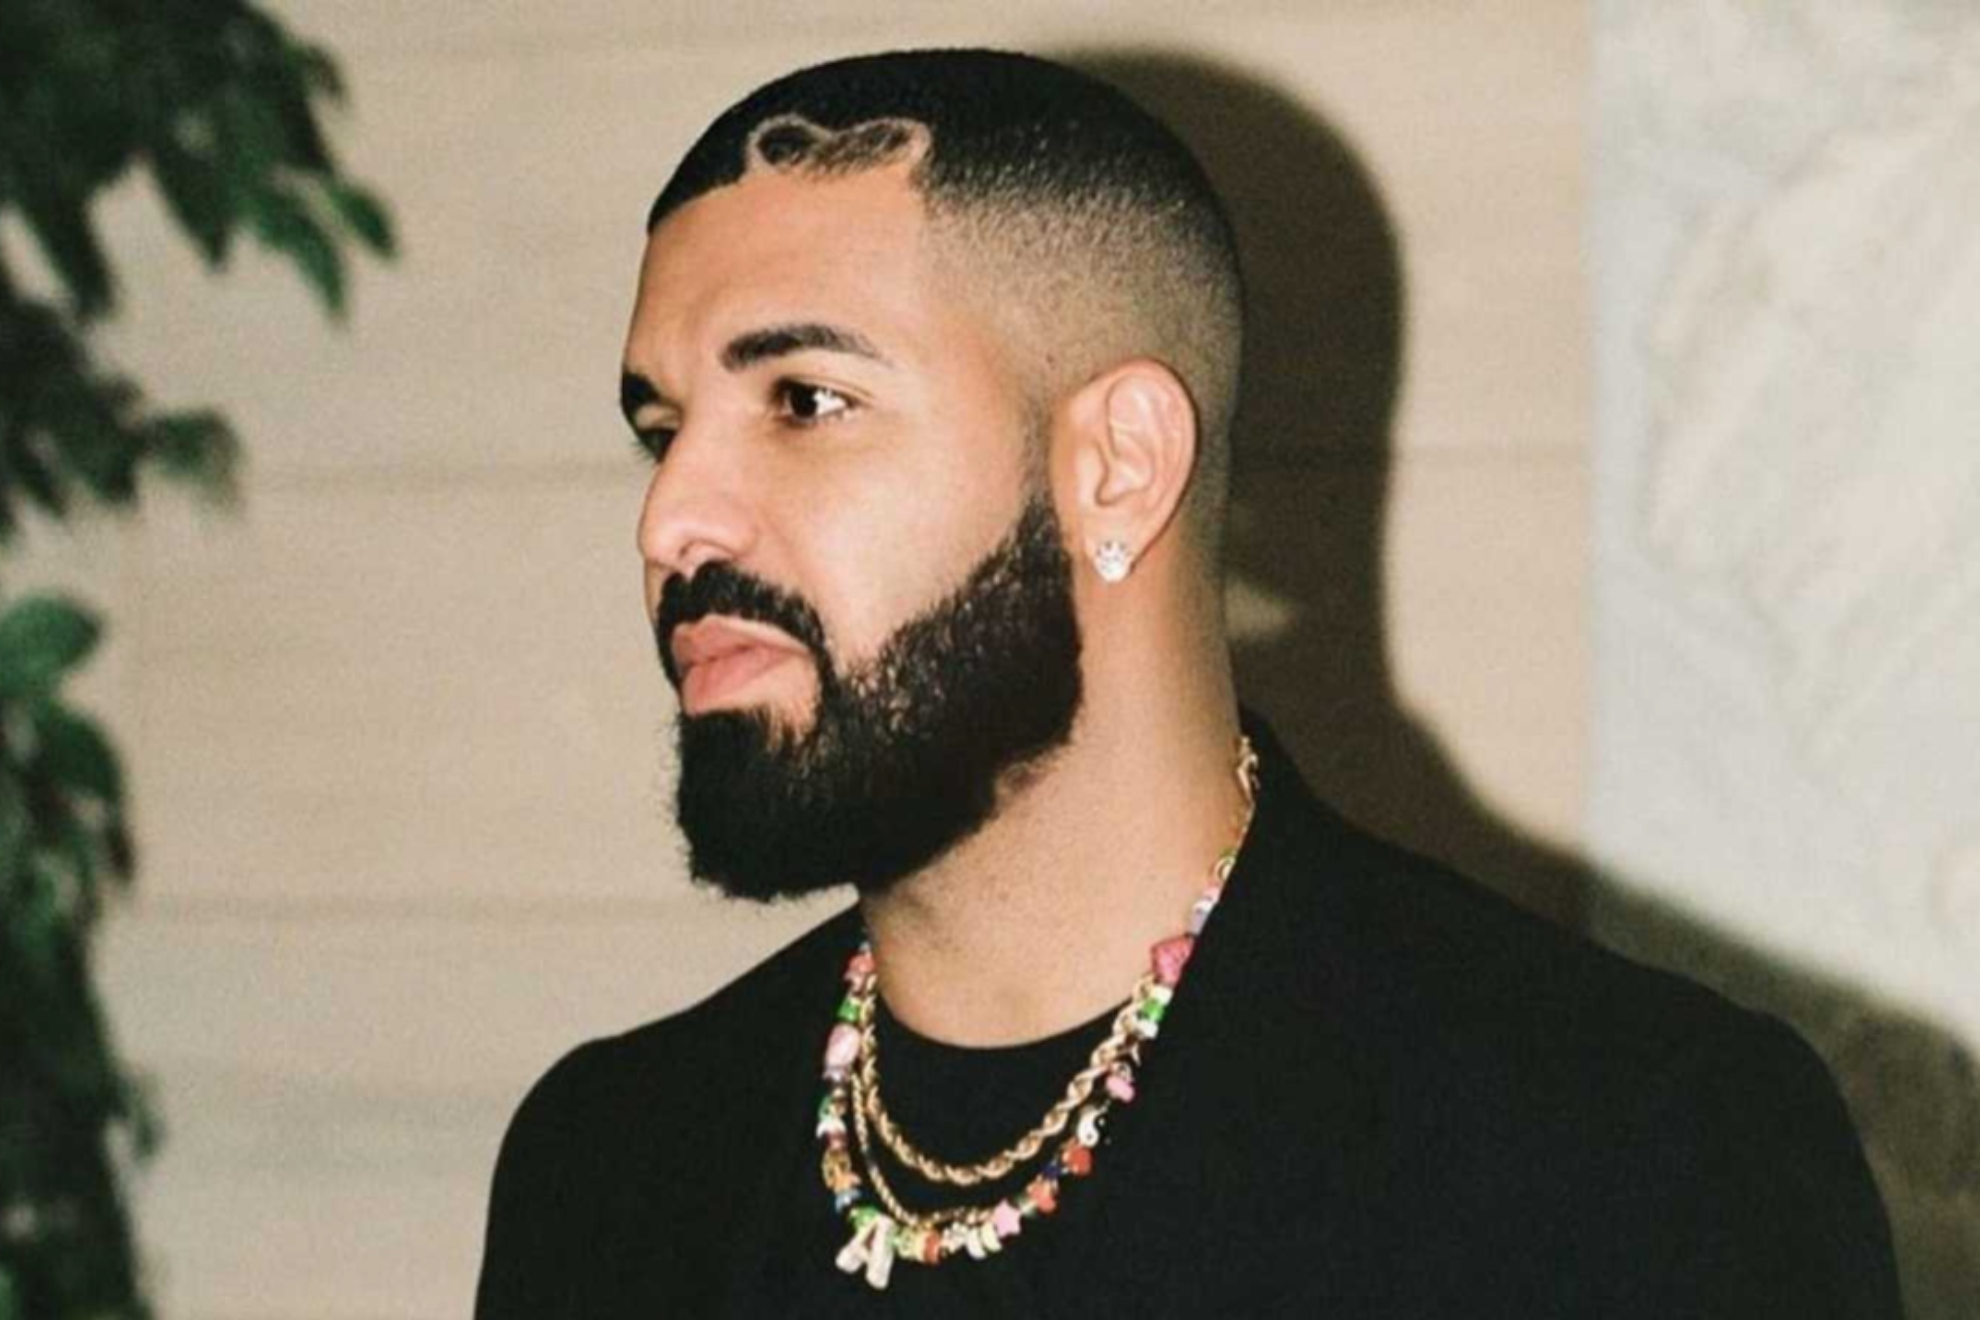 Drake on alleged leaked X-rated video: The rumors are true